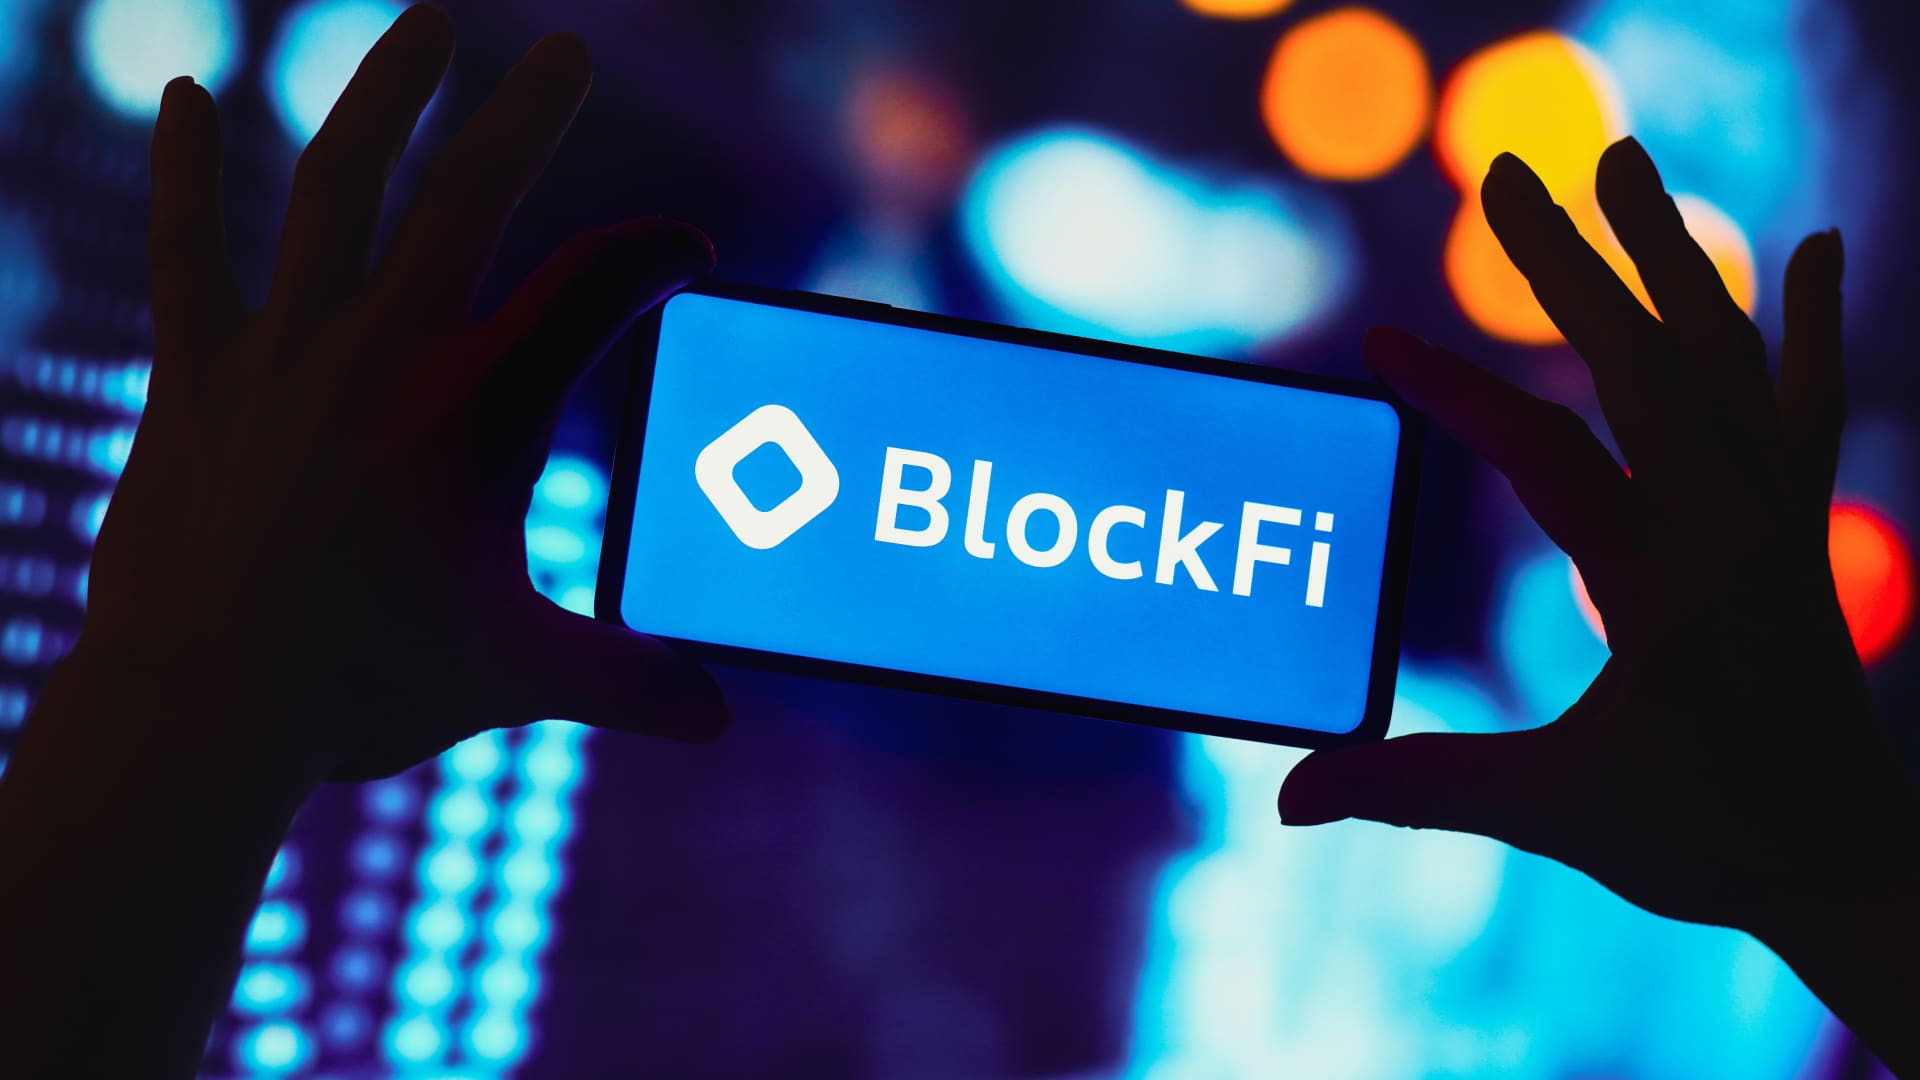 BlockFi lawyer tells court priority is to 'maximize client recoveries'